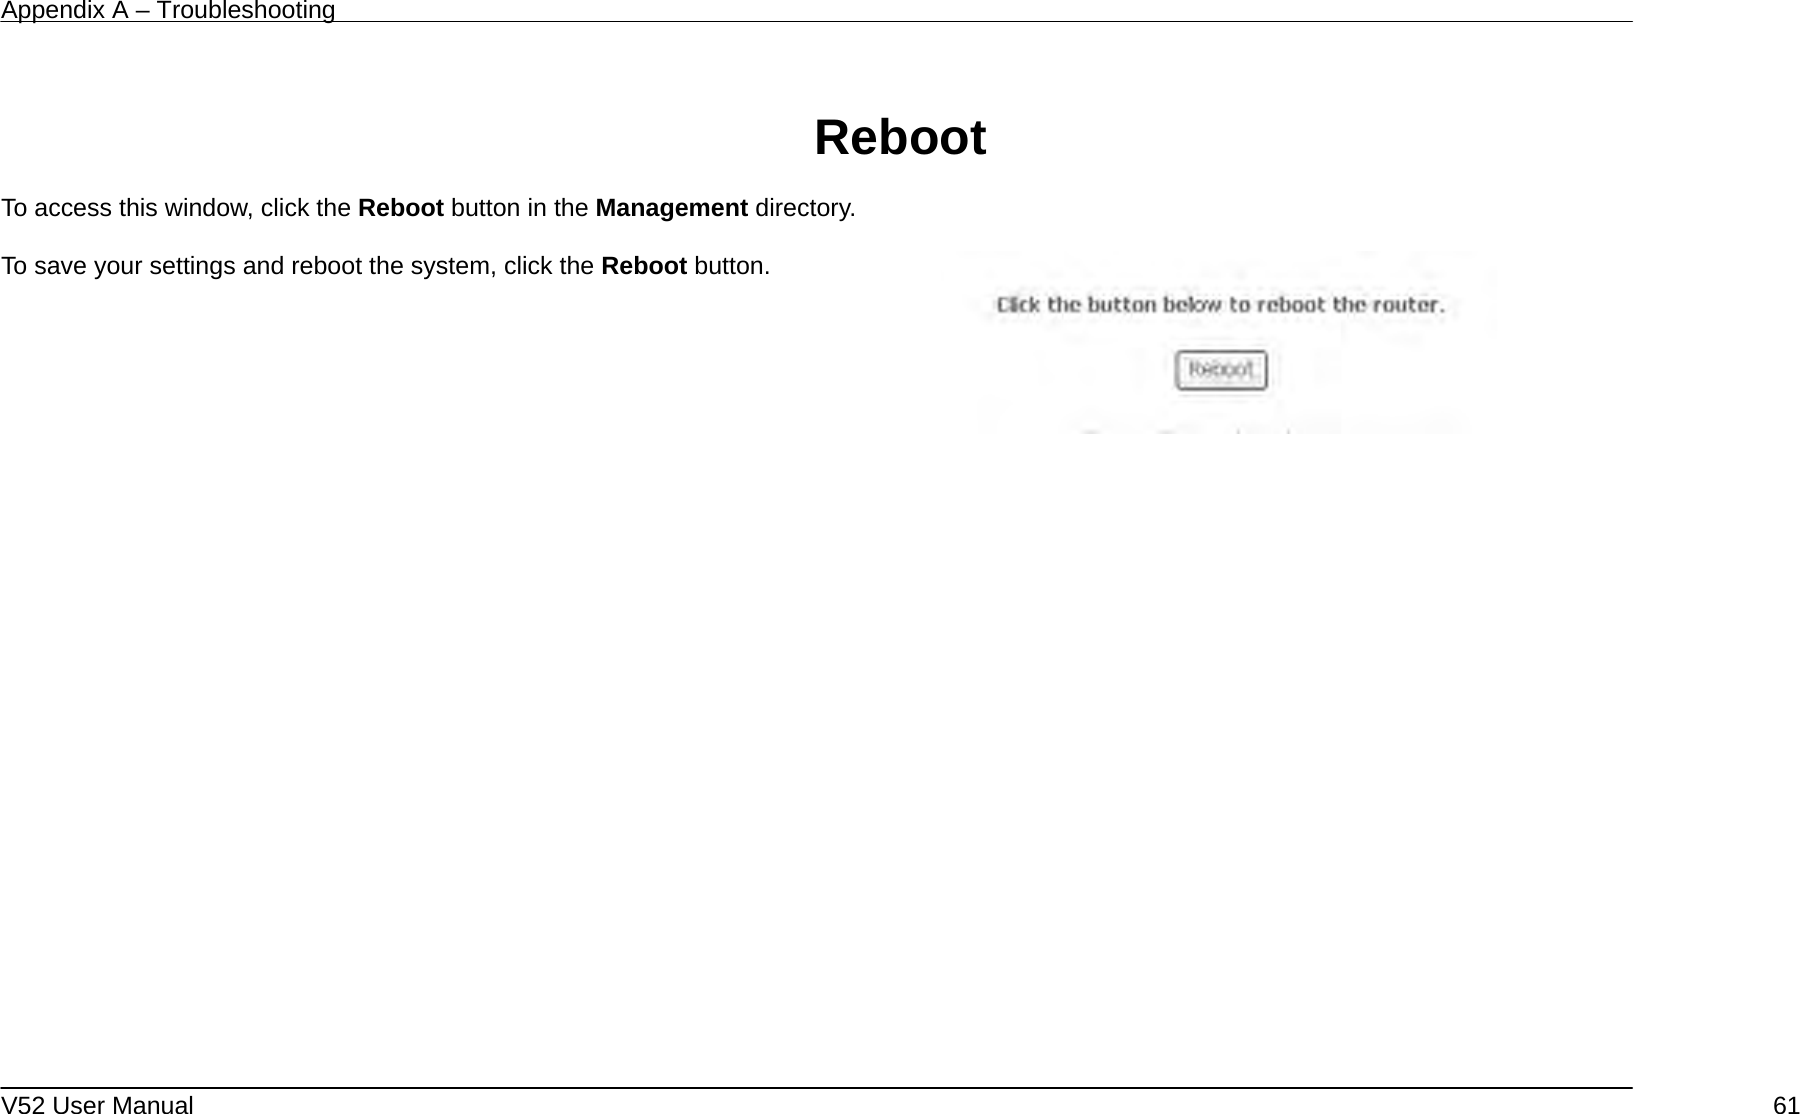 Appendix A – Troubleshooting   V52 User Manual    61 Reboot  To access this window, click the Reboot button in the Management directory.  To save your settings and reboot the system, click the Reboot button.        